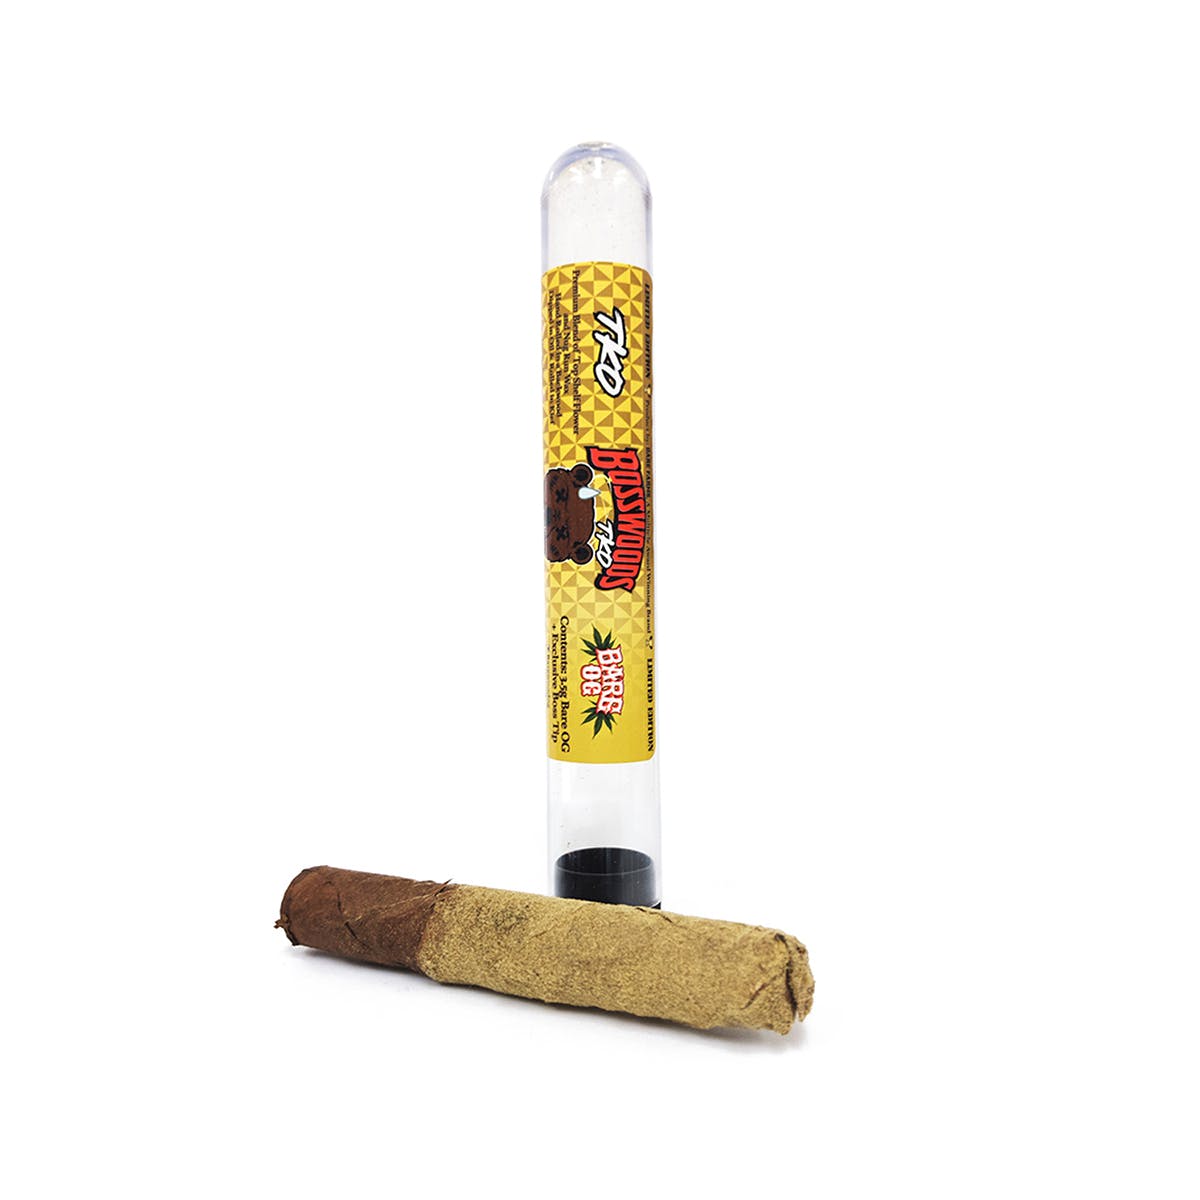 preroll-barewoods-bosswoods-tko-limited-edition